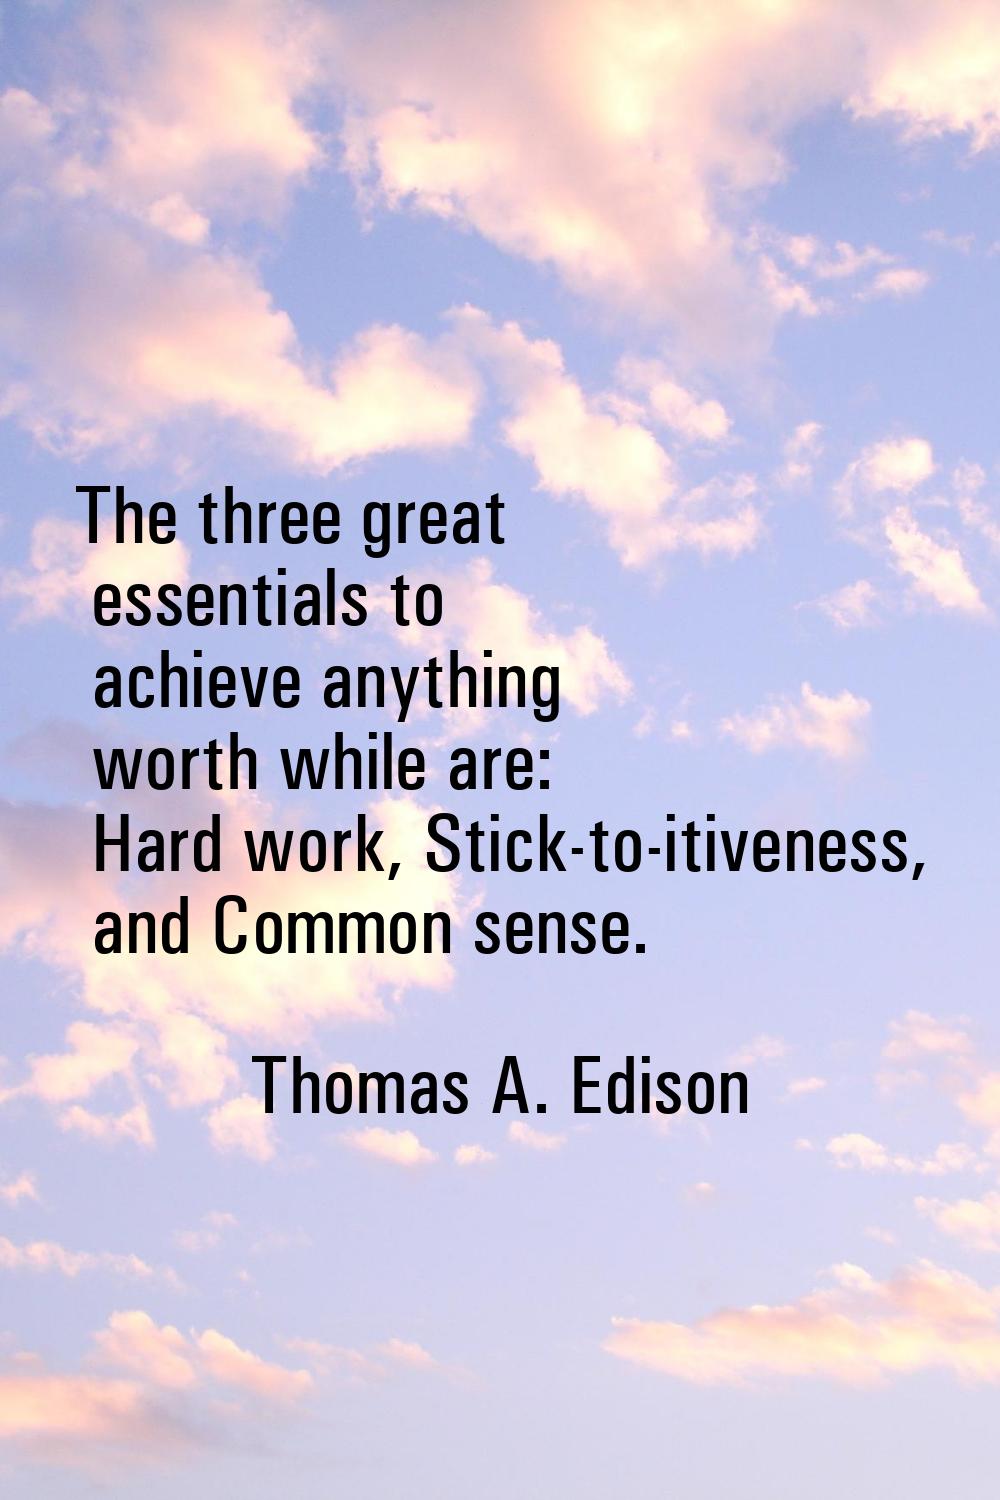 The three great essentials to achieve anything worth while are: Hard work, Stick-to-itiveness, and 